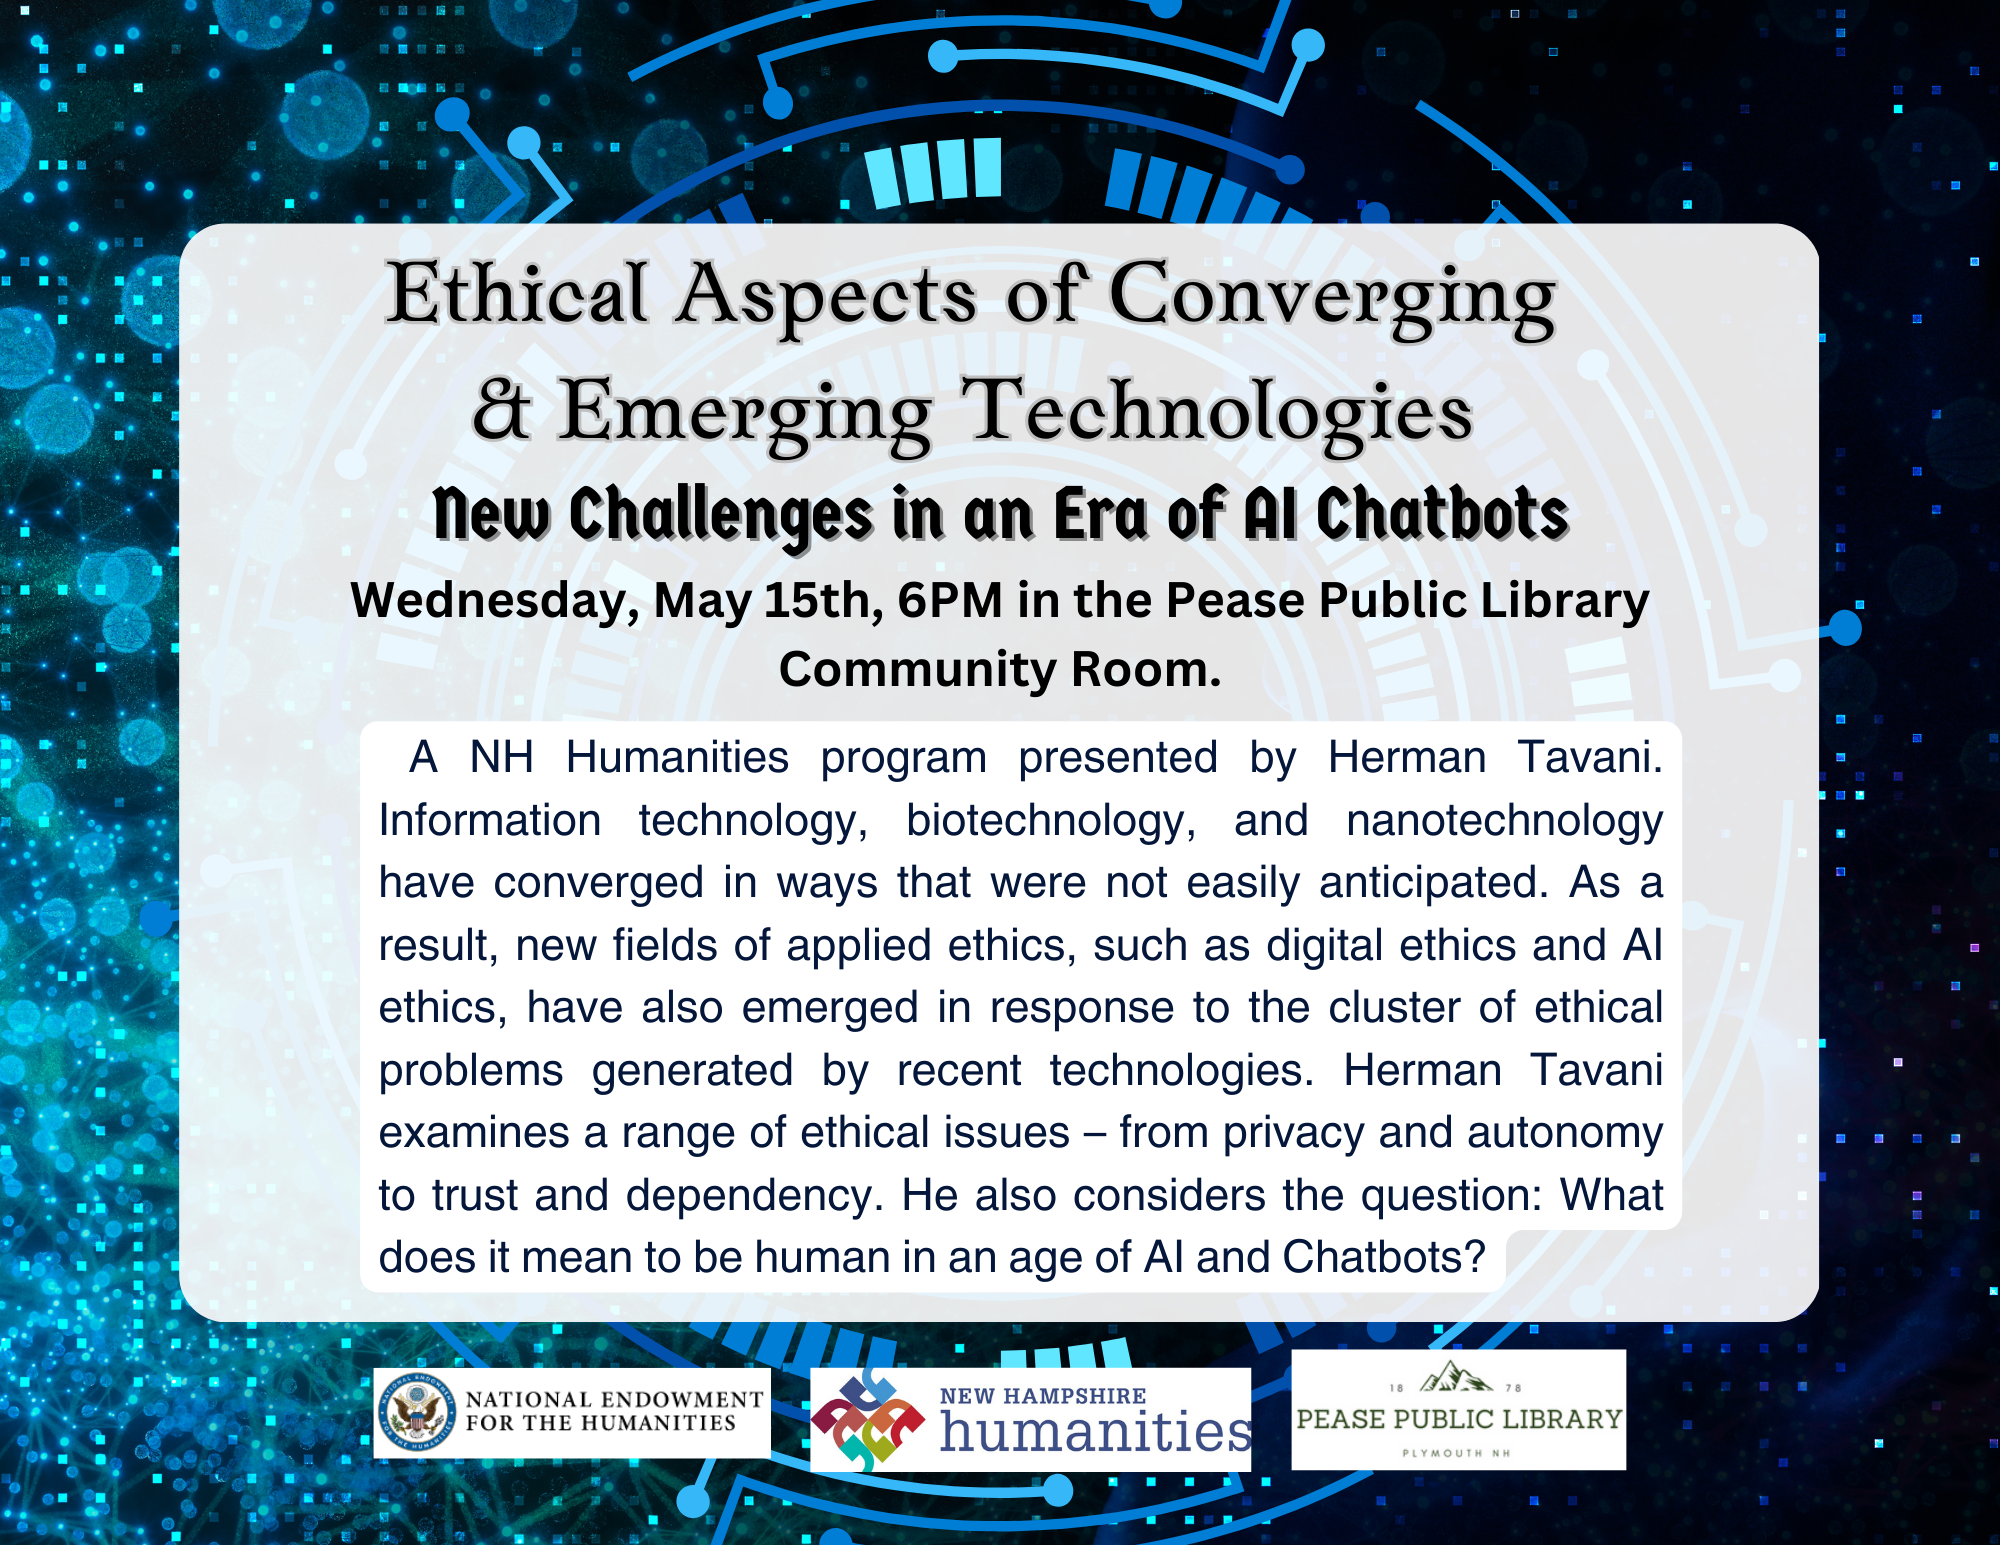 A NH Humanities program presented by Herman Tavani. Information technology, biotechnology, and nanotechnology have converged in ways that were not easily anticipated. As a result, new fields of applied ethics, such as digital ethics and AI ethics, have also emerged in response to the cluster of ethical problems generated by recent technologies. Herman Tavani examines a range of ethical issues – from privacy and autonomy to trust and dependency. He also considers the question: What does it mean to be human in an age of AI and Chatbots? 